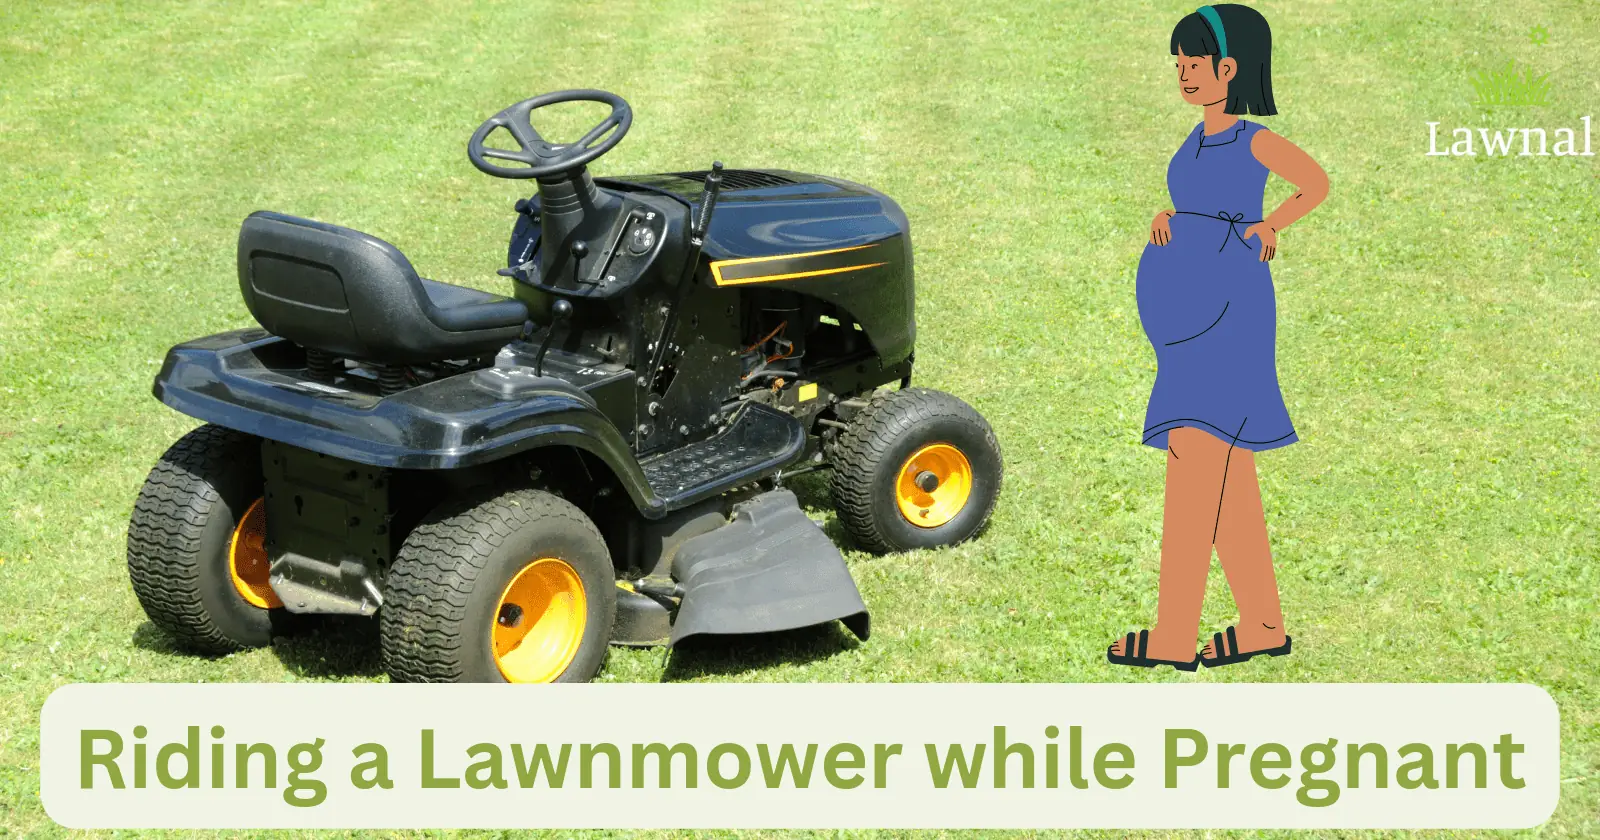 Riding mower while pregnant